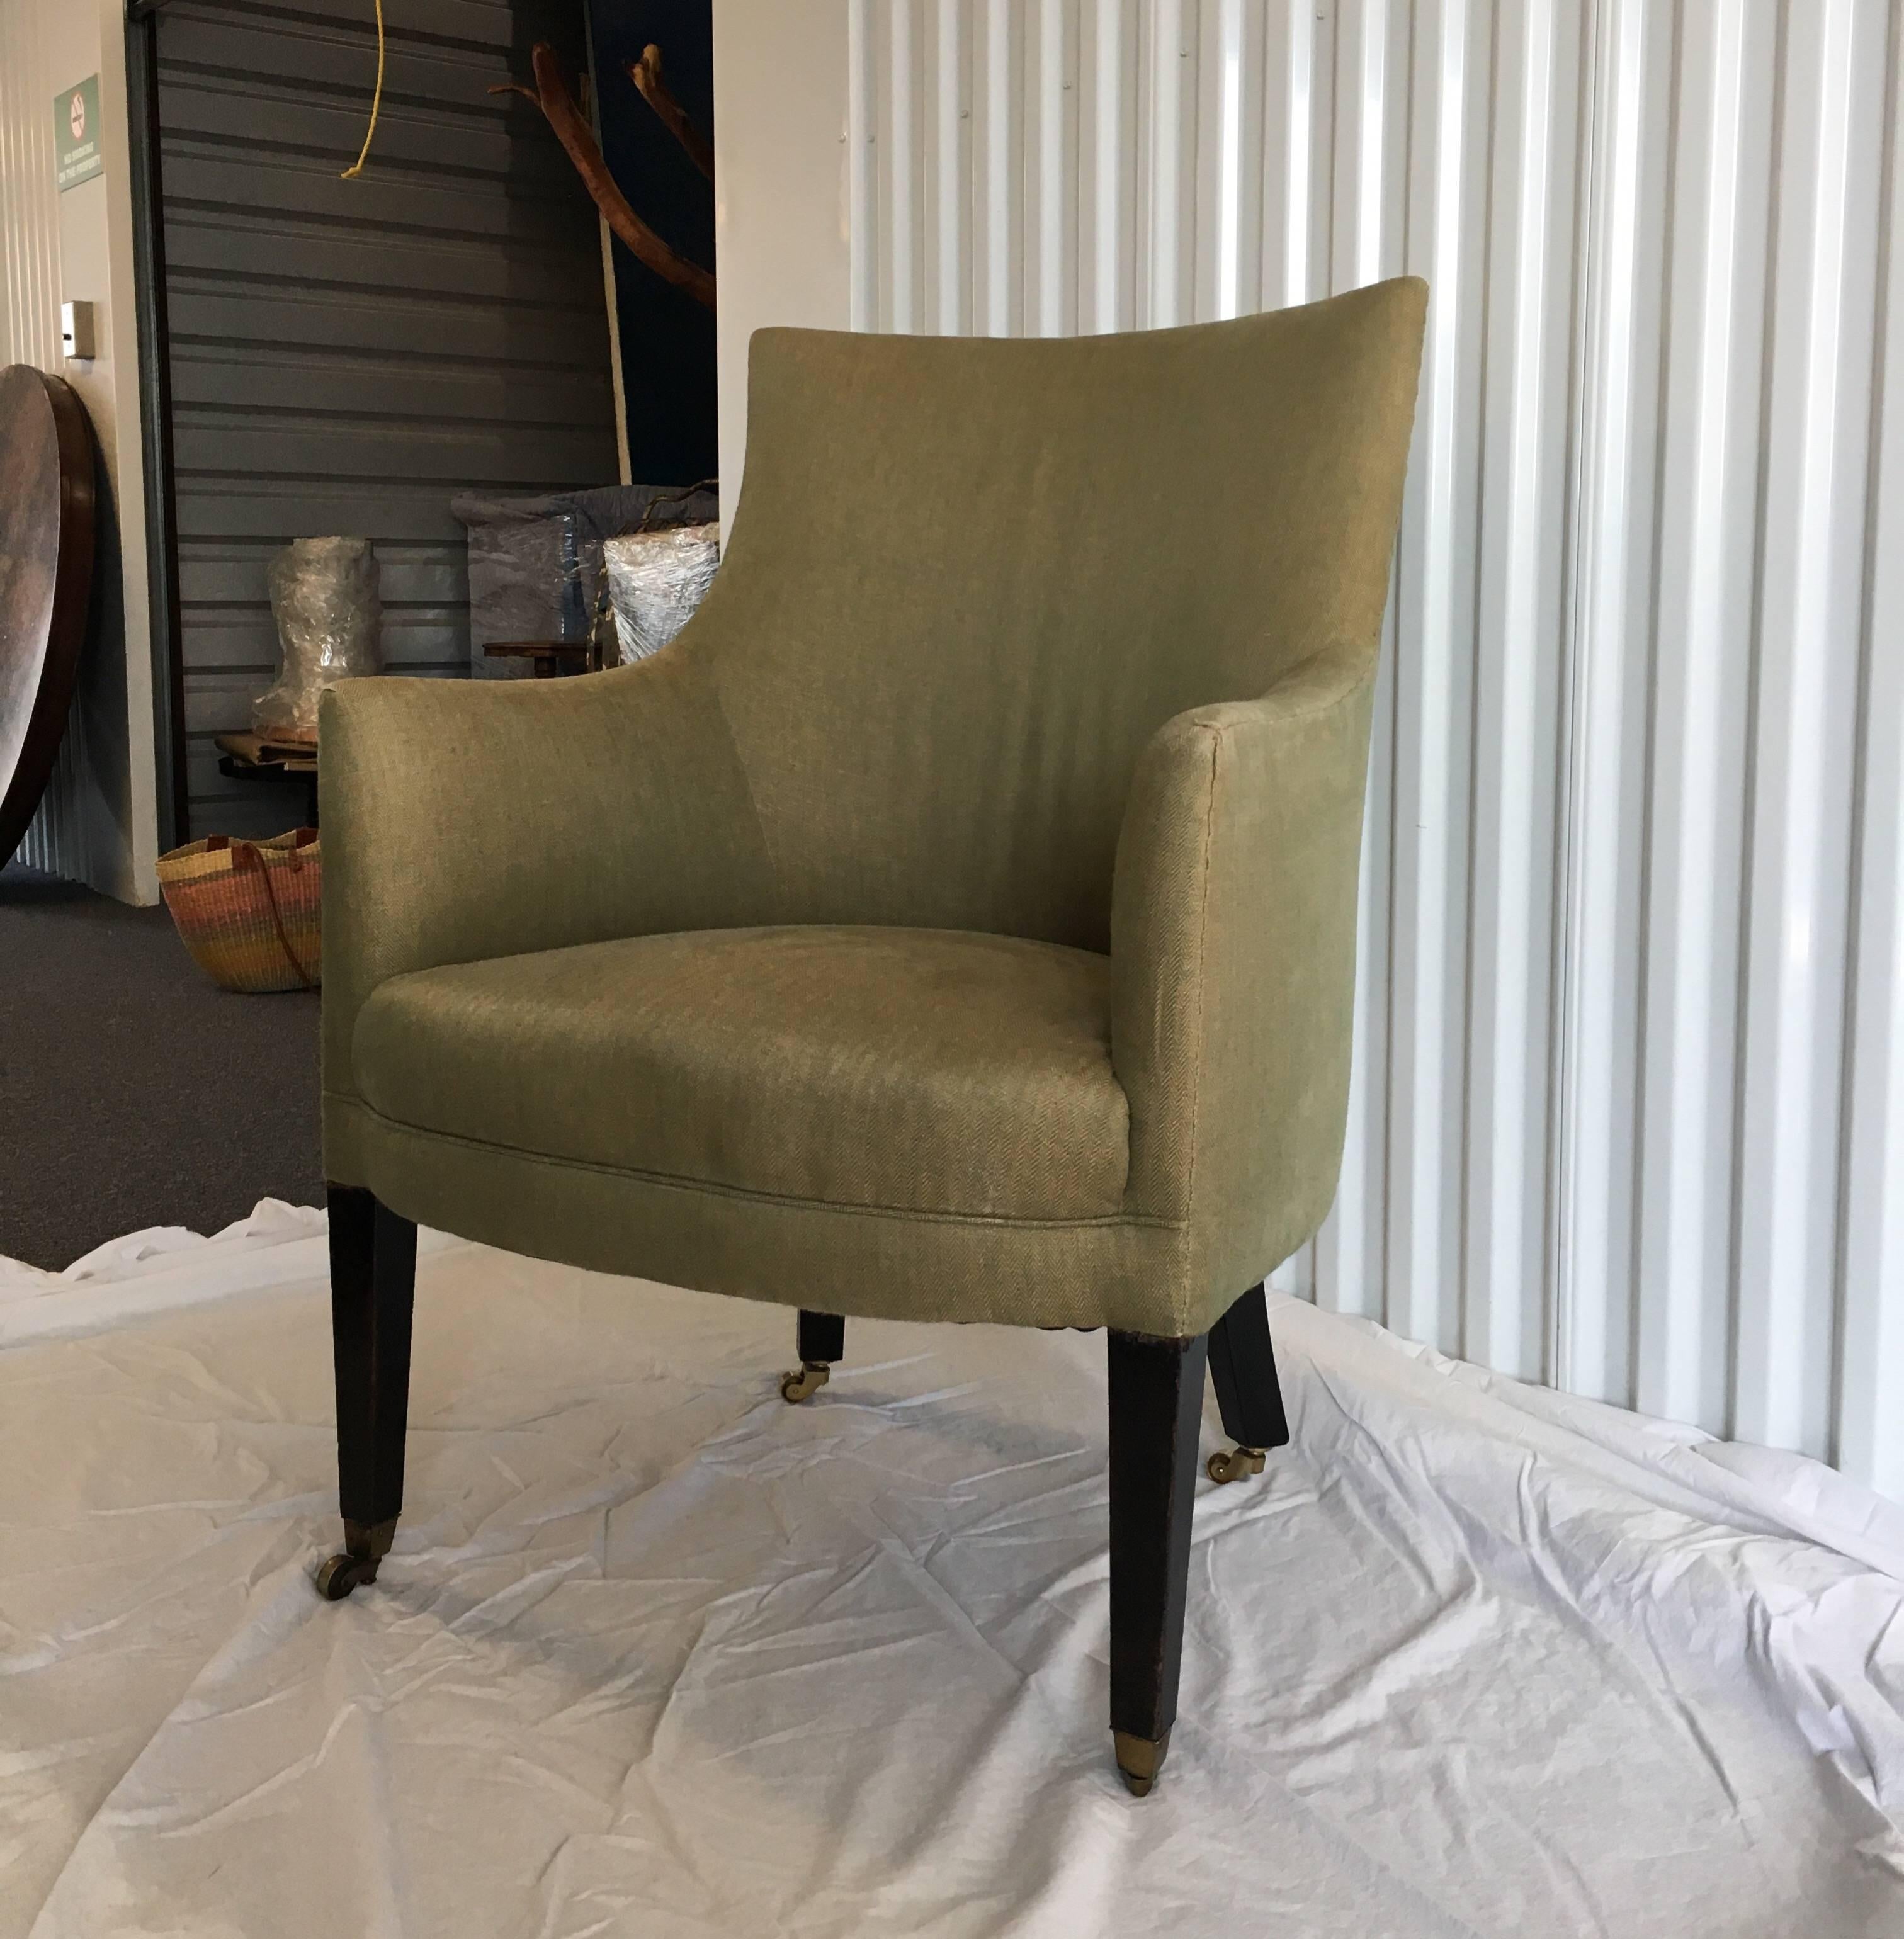 Upholstered English Library chair withbrass casters in green woven herringbone fabric.
 